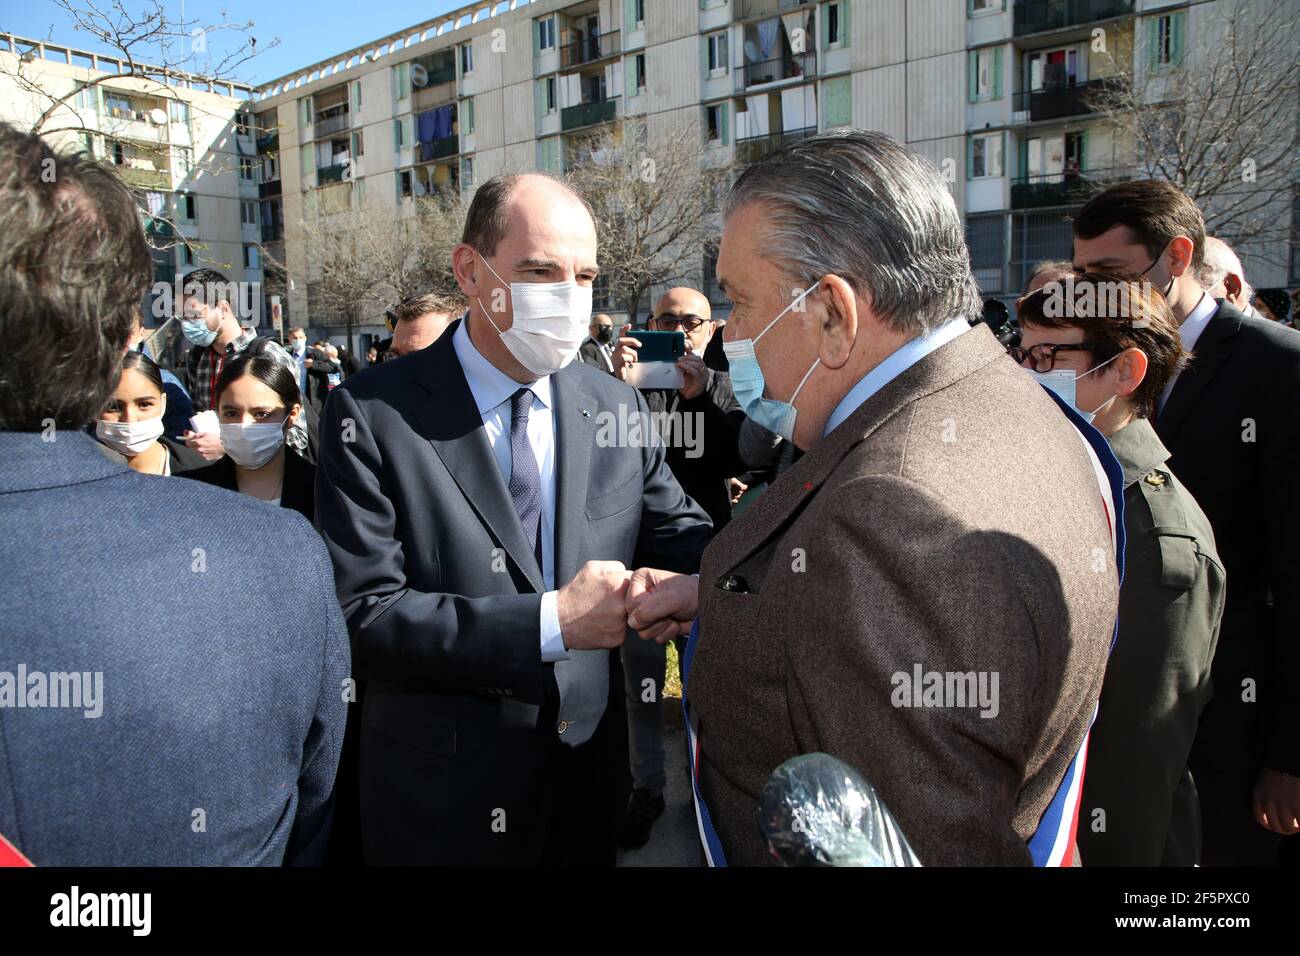 Jean Castex and Jean-Paul Fournier Mayor of Nimes.French Prime Minister Jean  Castex speaks with local inhabitants as they visit the Pissevin popular  neighbourhood in Nimes, France, on March 27, 2021, as part